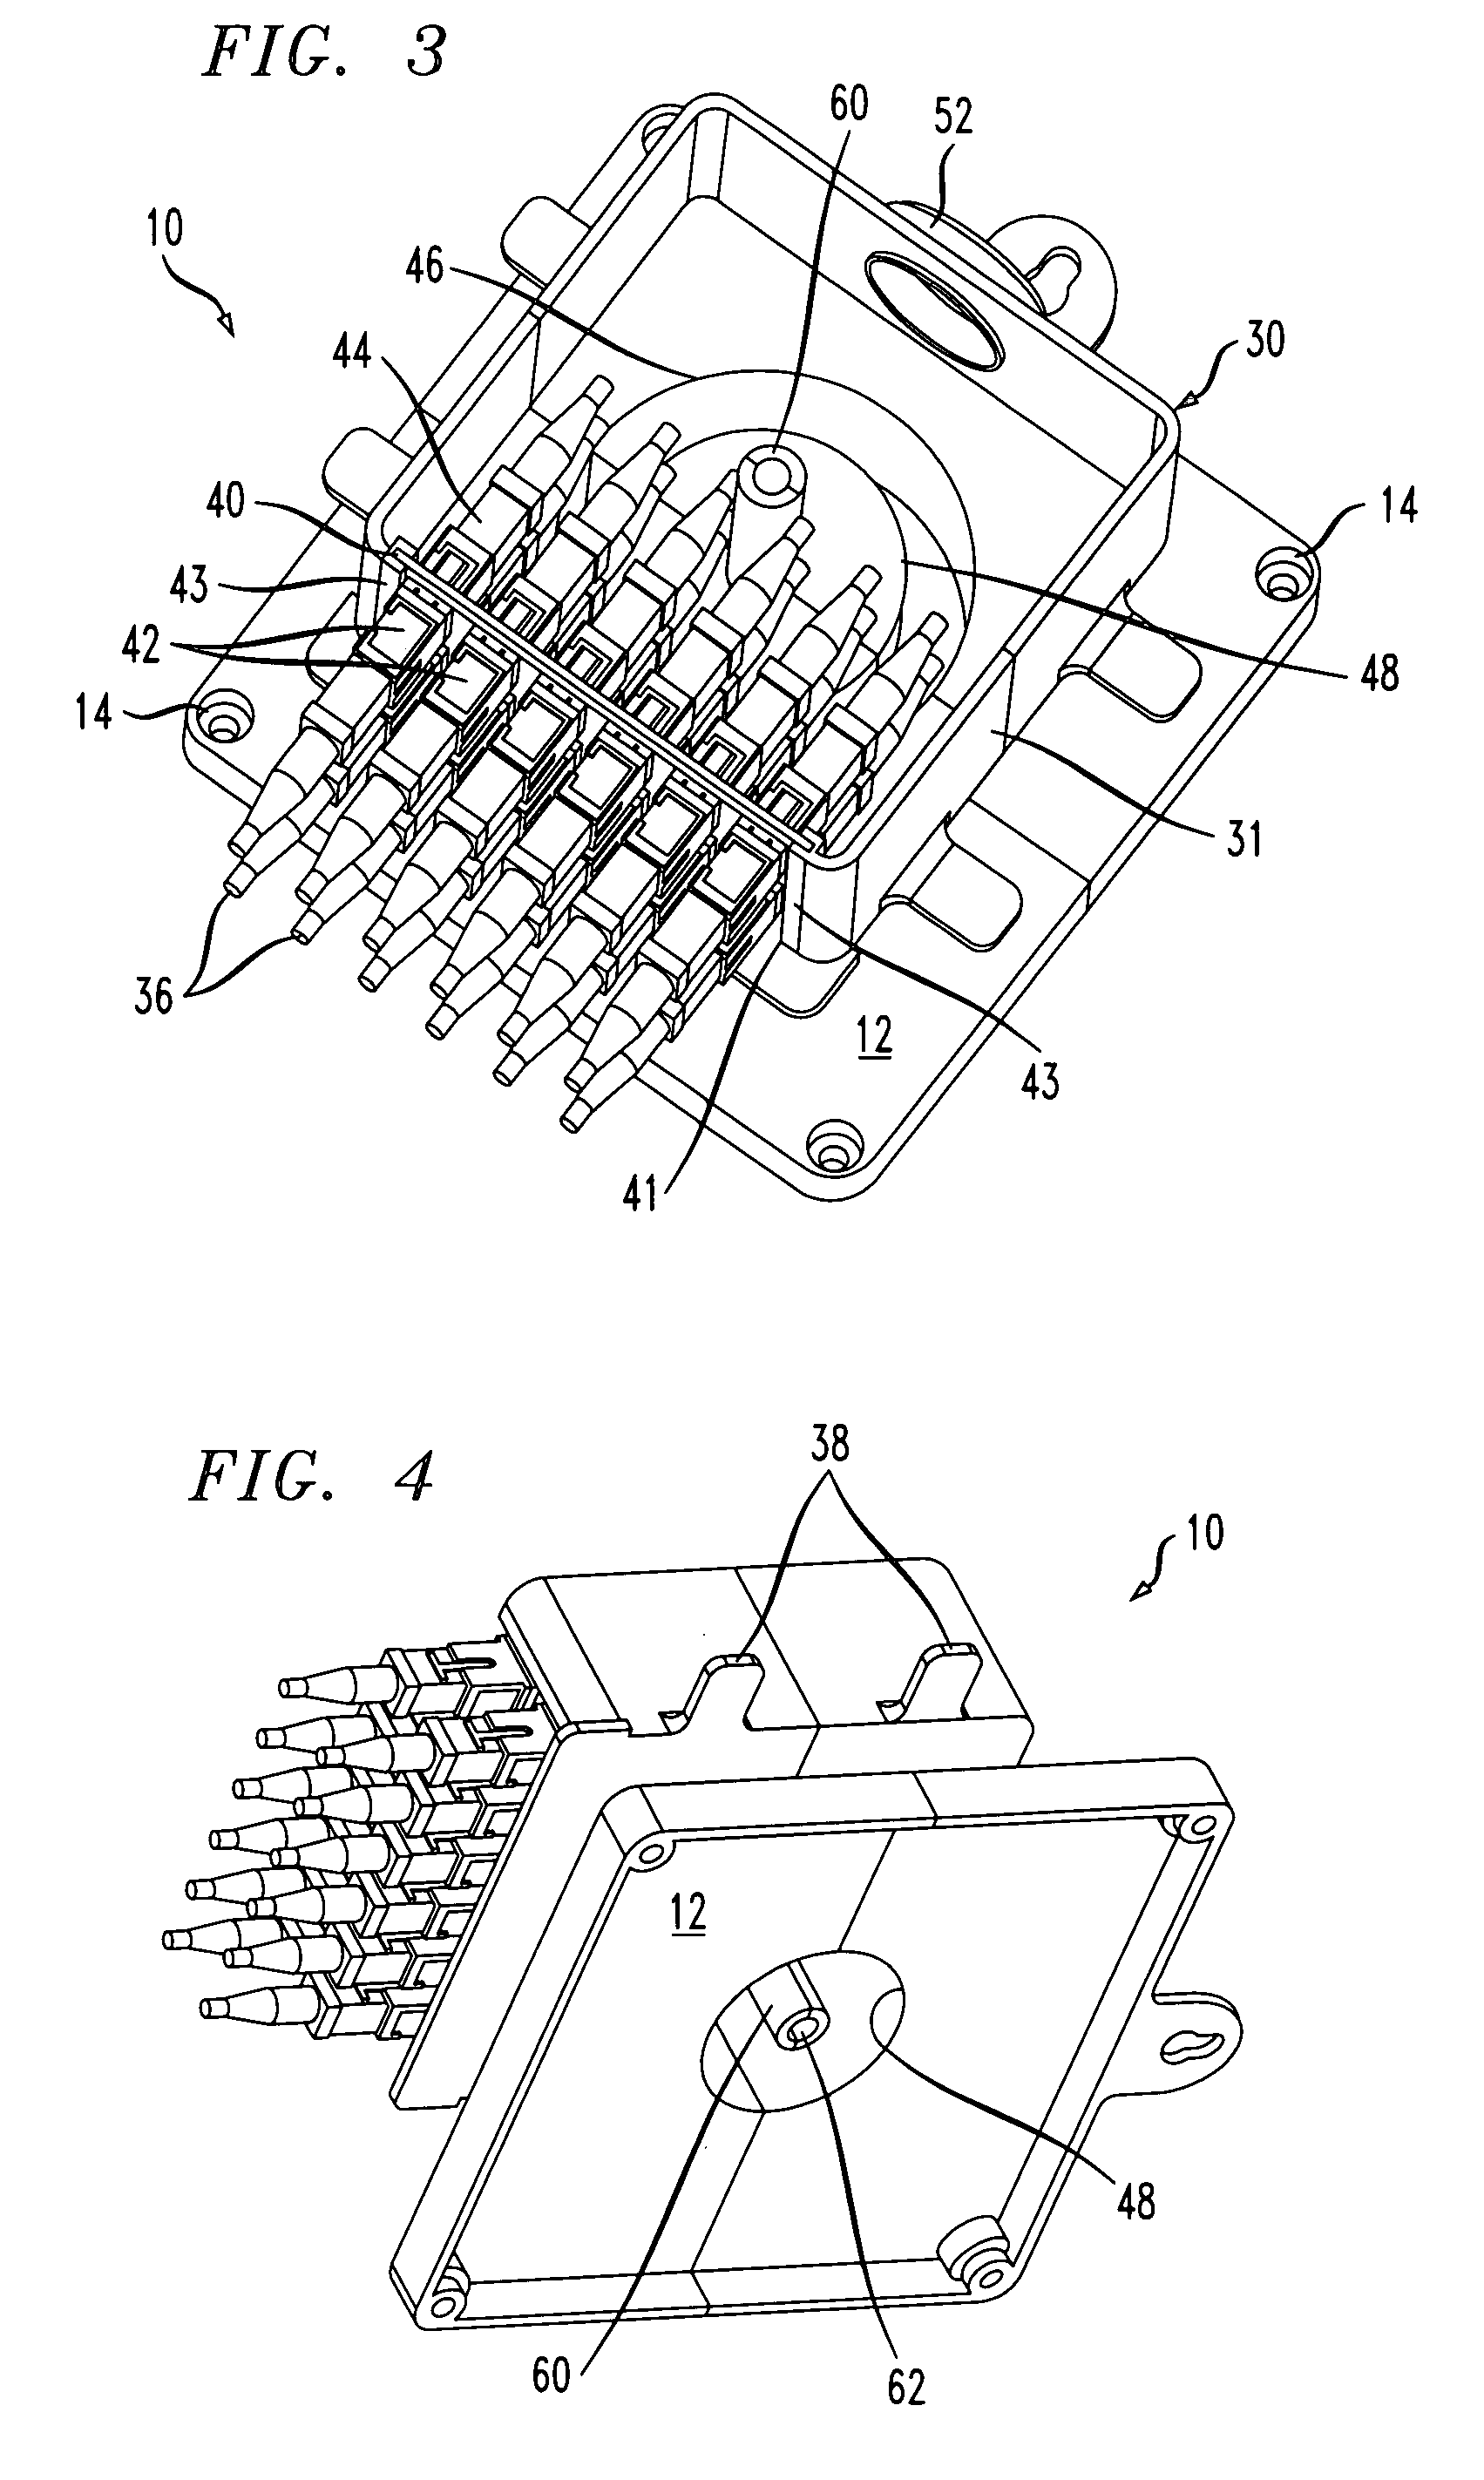 Wall-mountable optical fiber and cable management apparatus